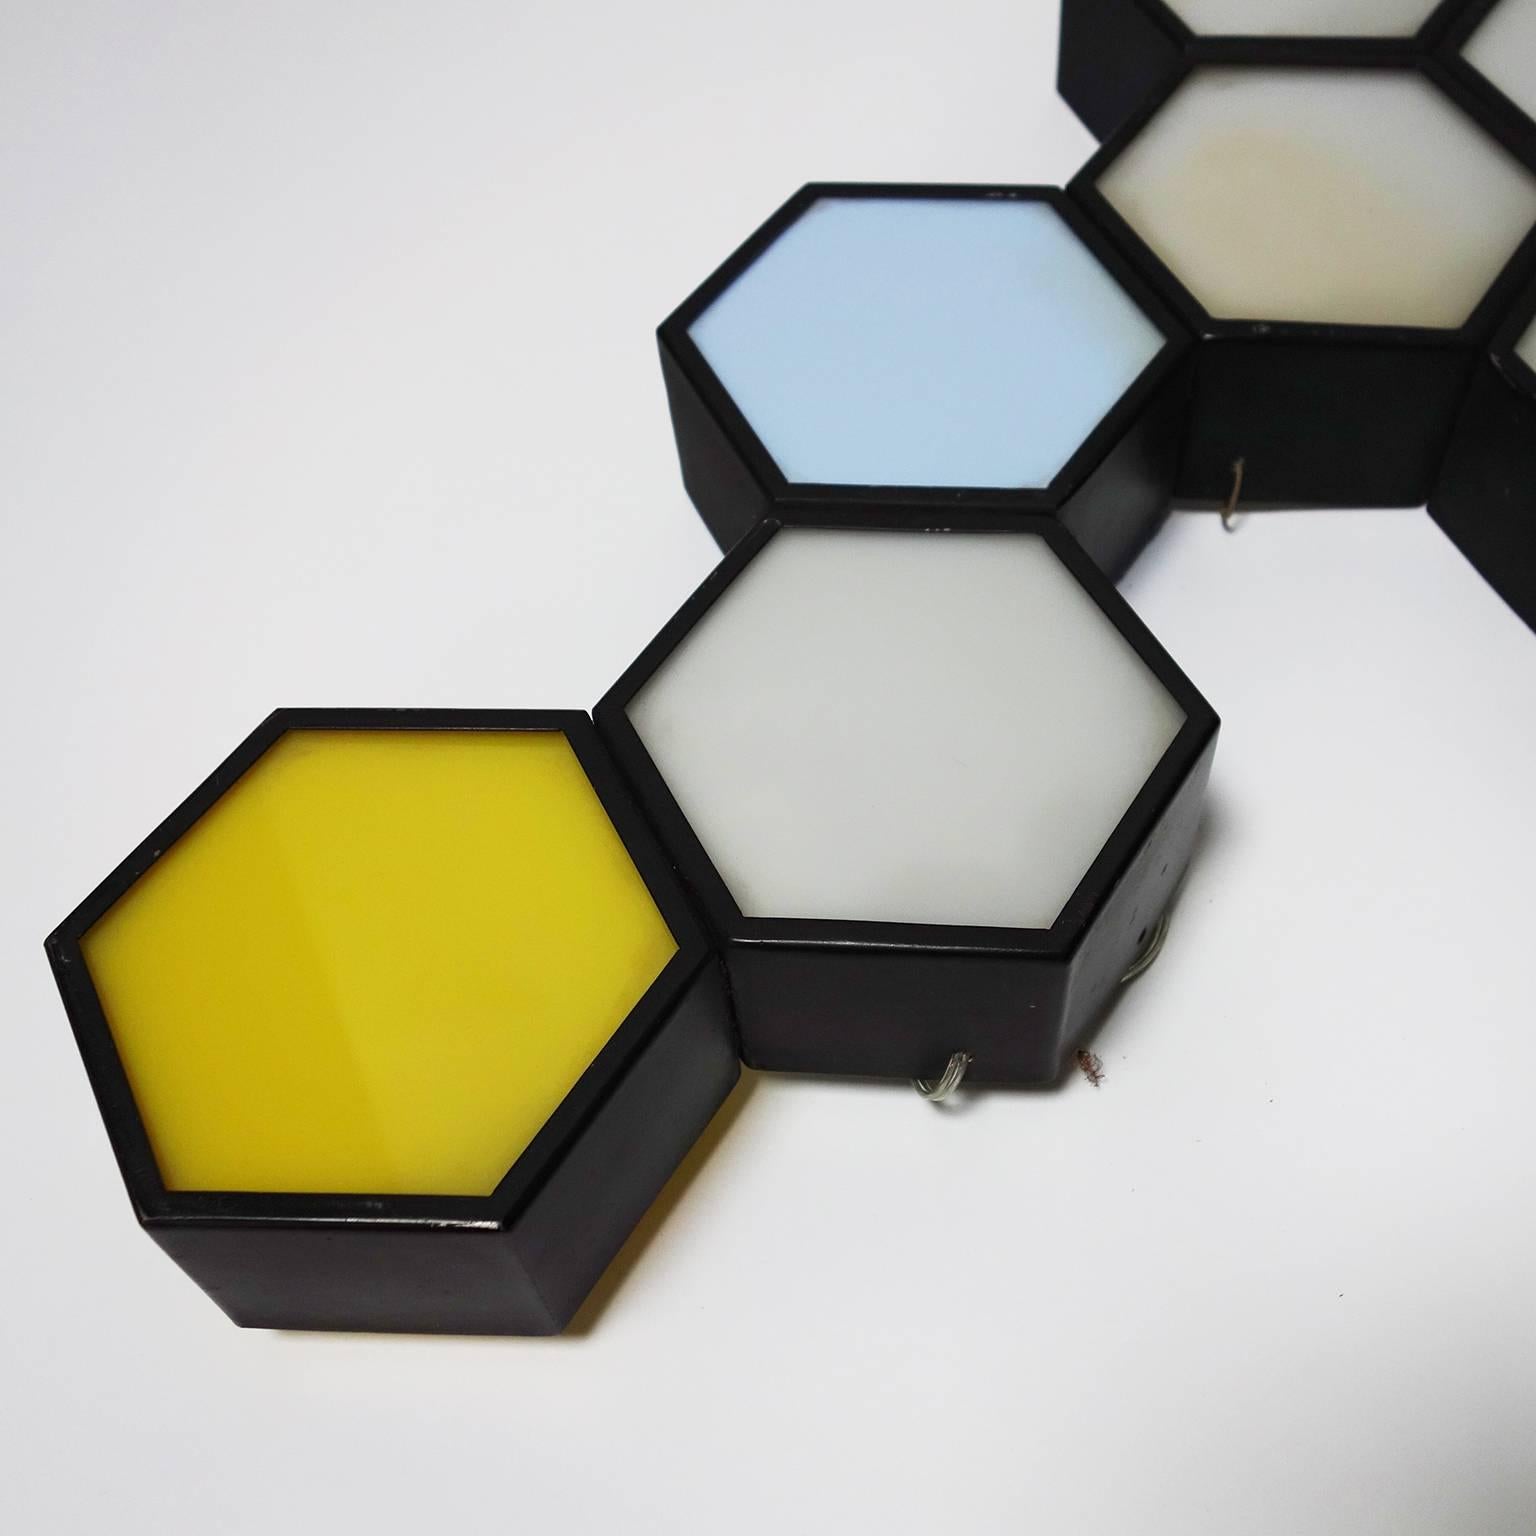 Italian sconce composed two ensembles of metal hexagons with colored plastic lampshades.

Measurements of each sconce:

Large: Width 86 cm, height 52 cm, depth 7 cm.
Small: Width 38 cm, height 26.5 cm, depth 7 cm.